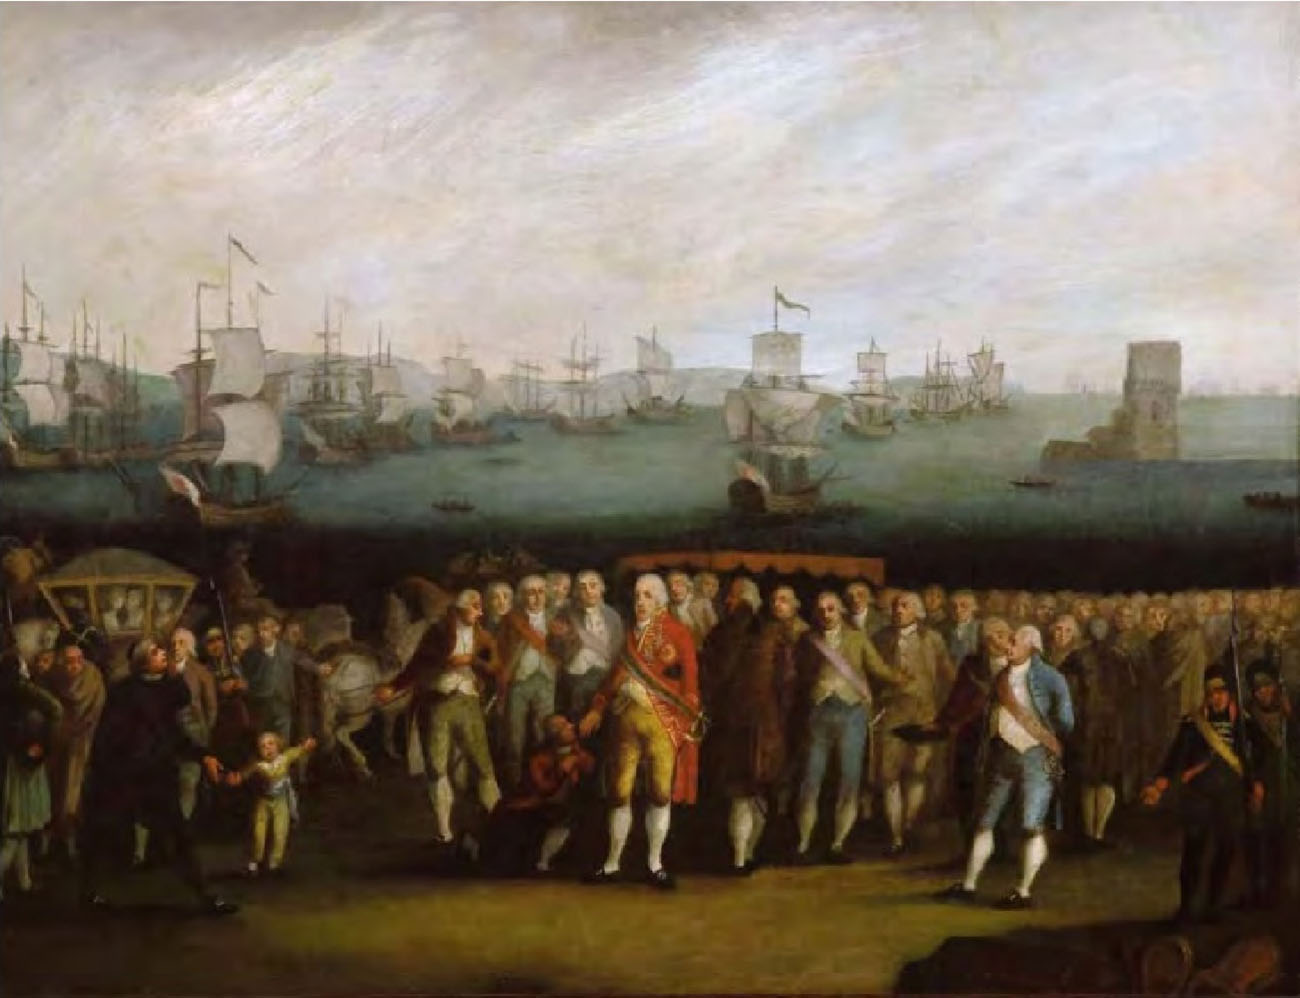 A crowd of men span the painting from left to right and stand facing forward. There are a couple of children with them. A fleet of large ships is in the background.